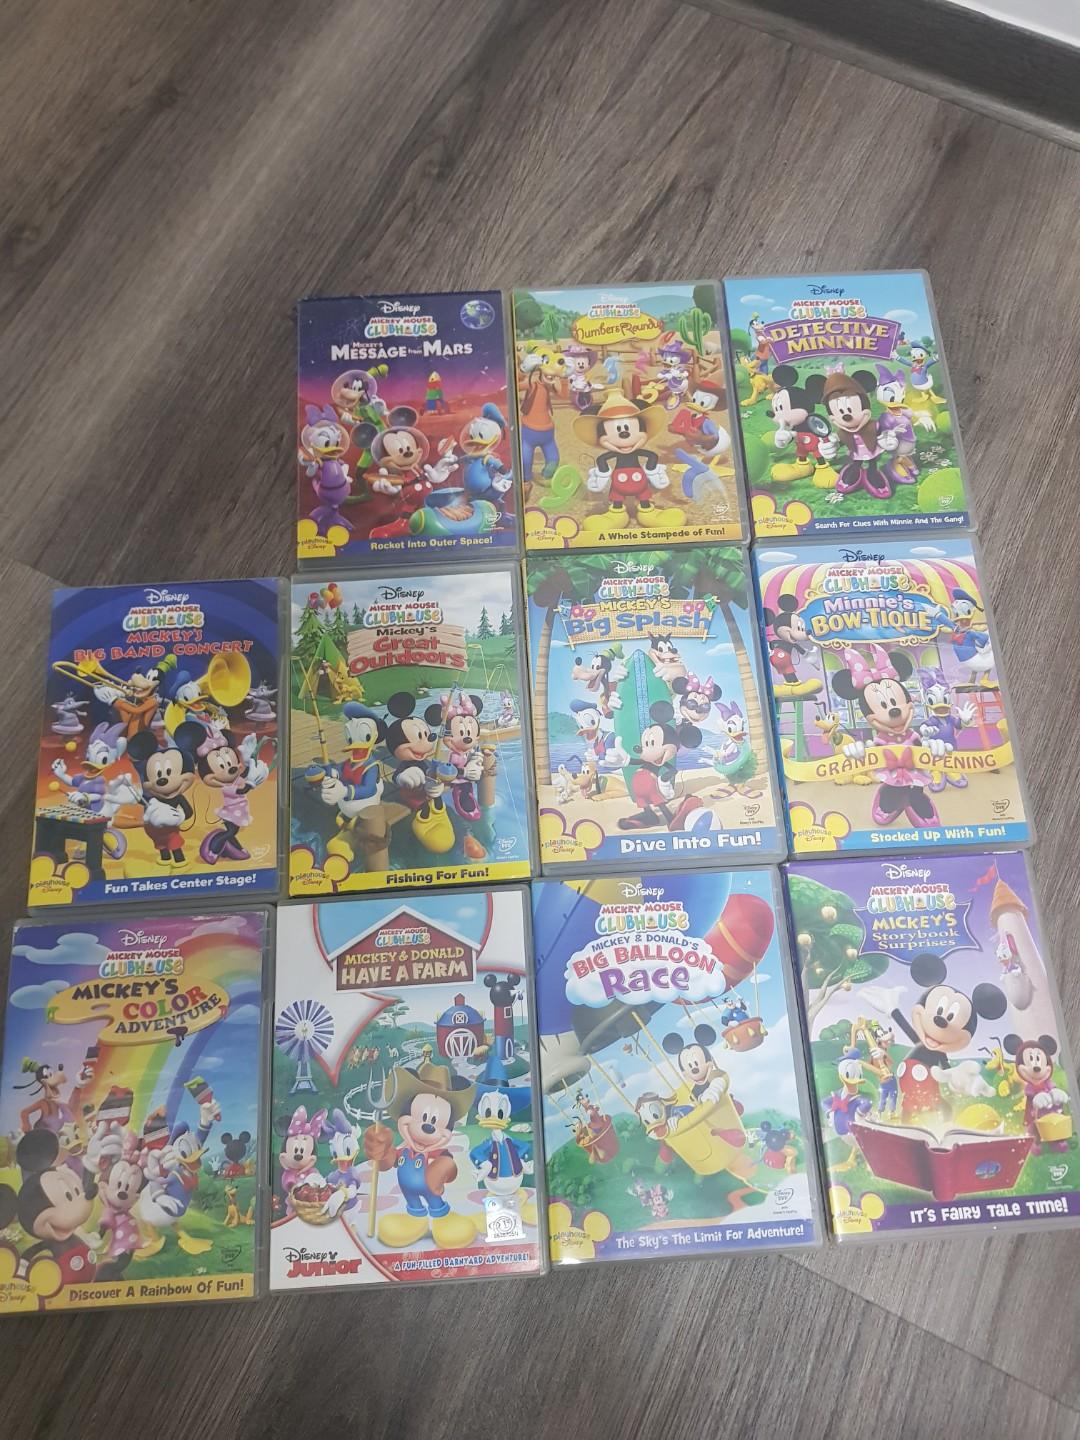 Mickey mouse clubhouse dvd box set uk